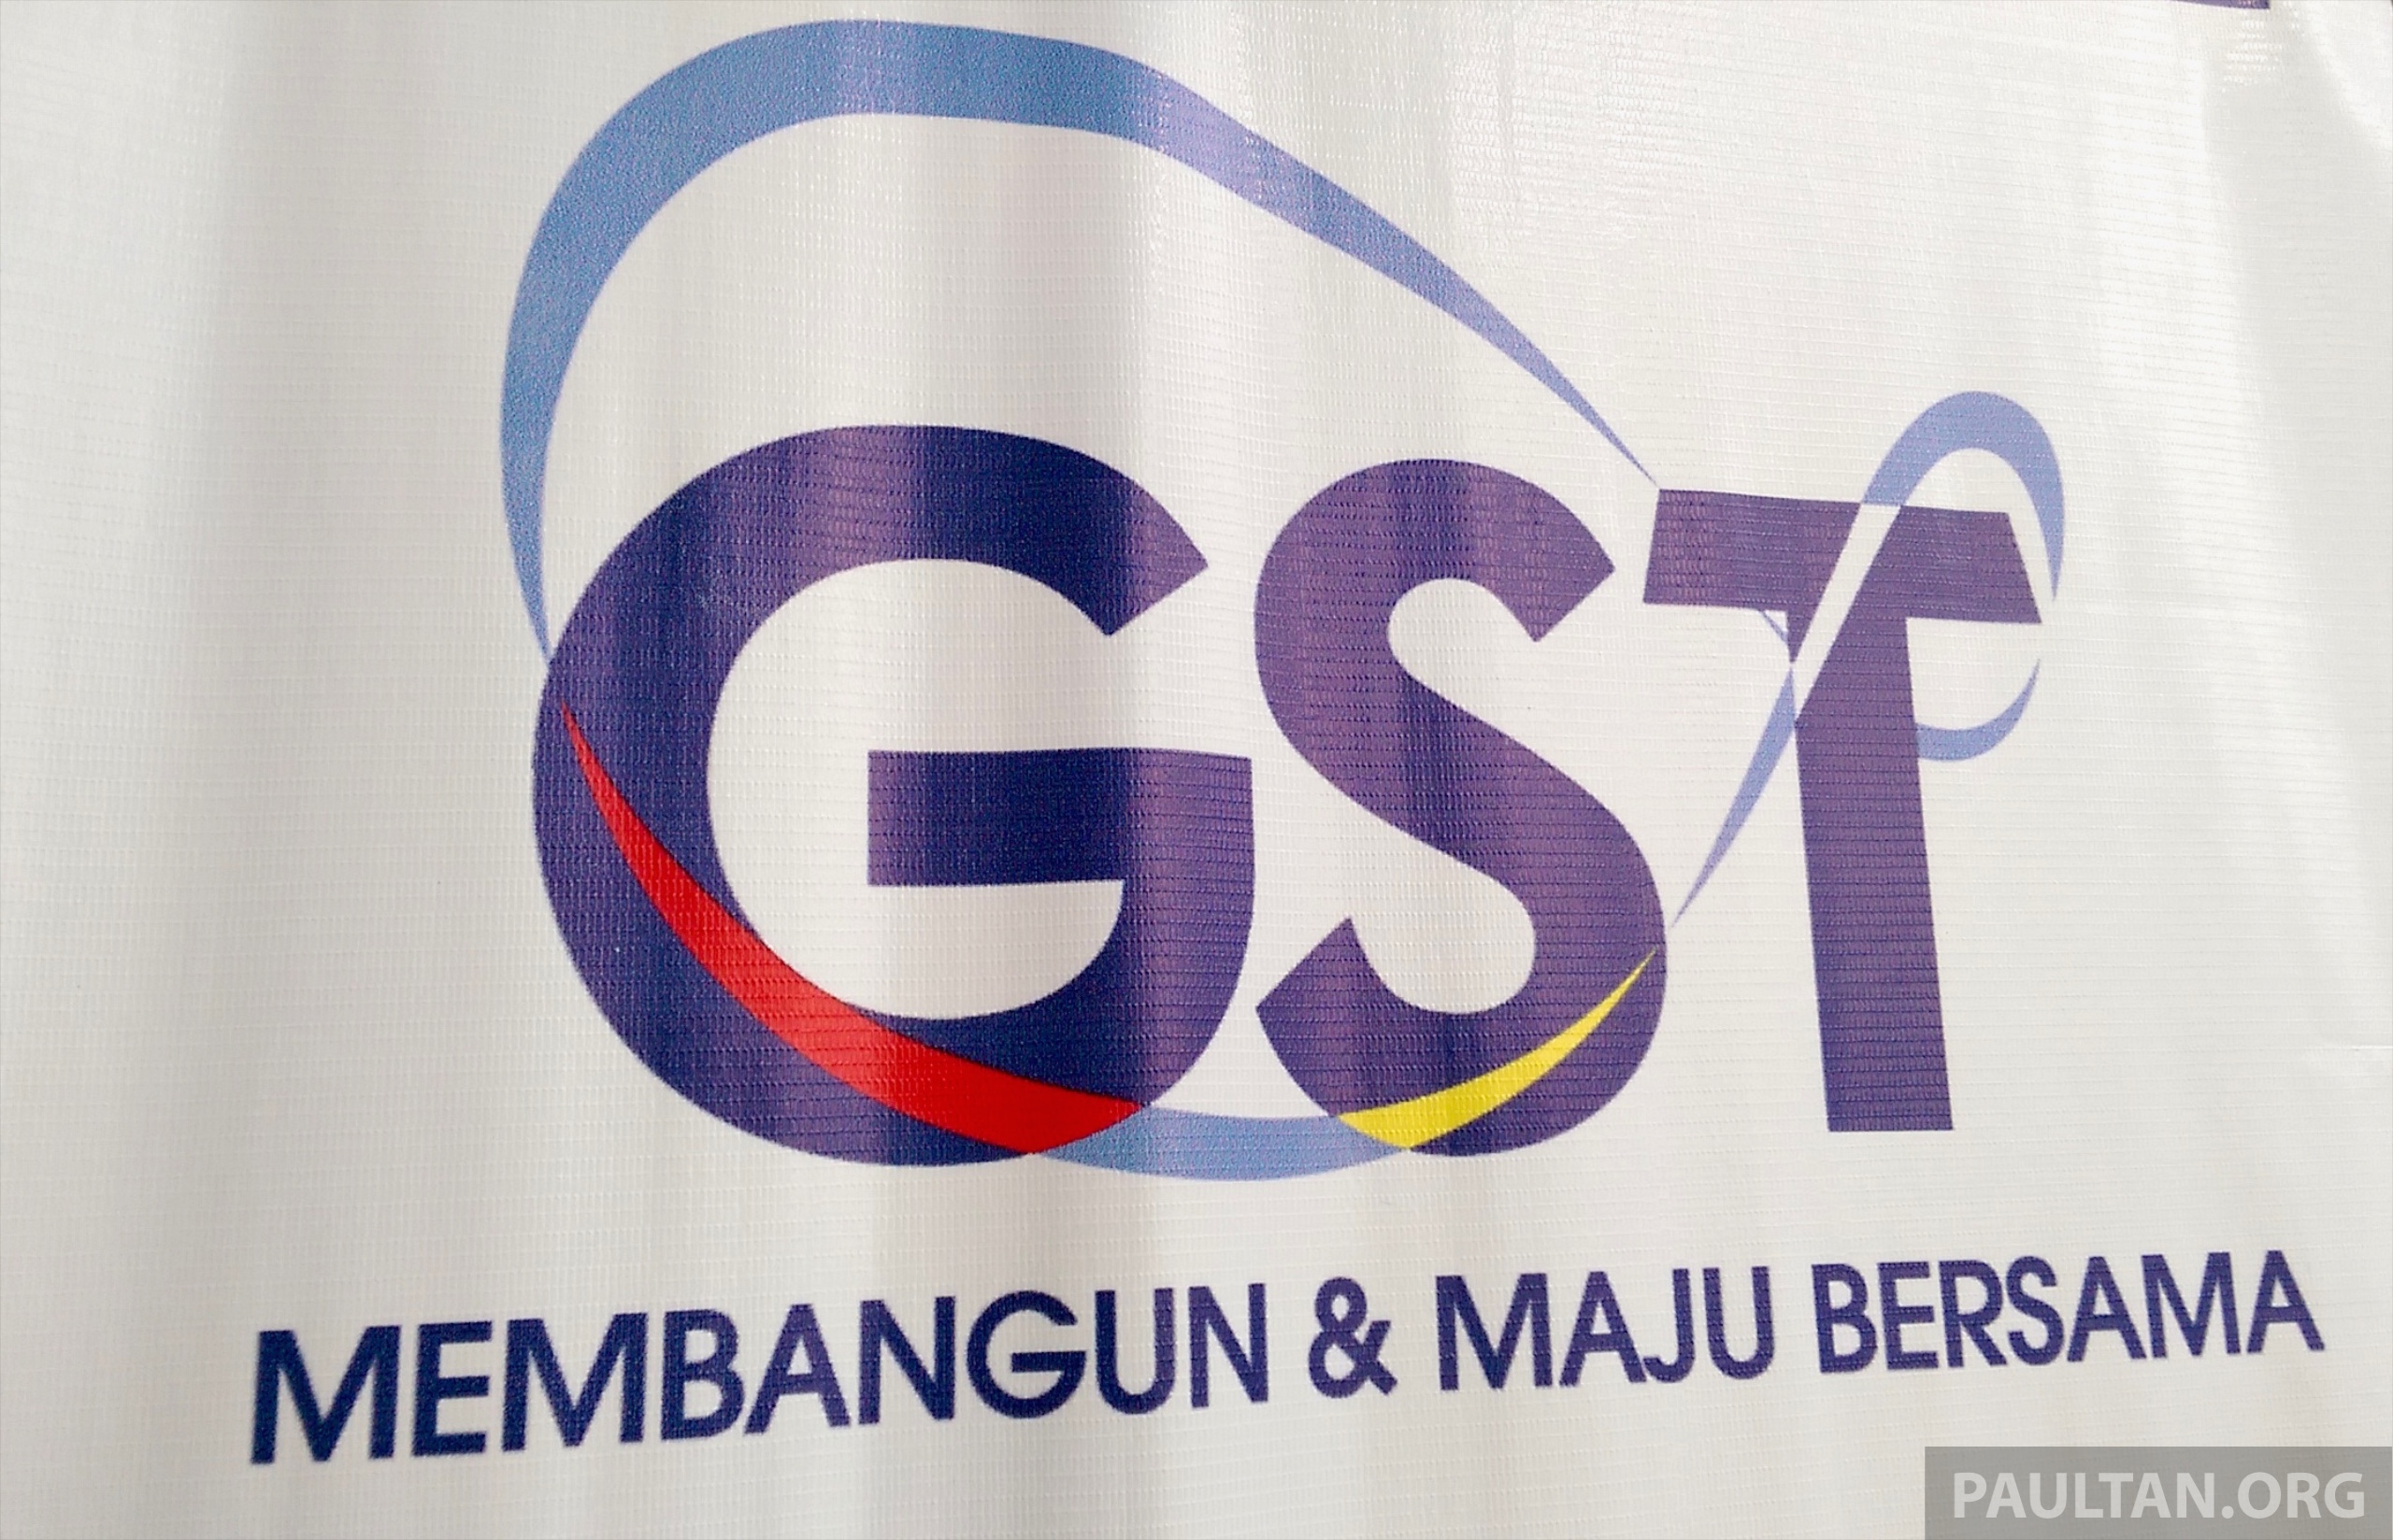 0-gst-from-june-1-what-does-this-mean-for-businesses-and-consumers